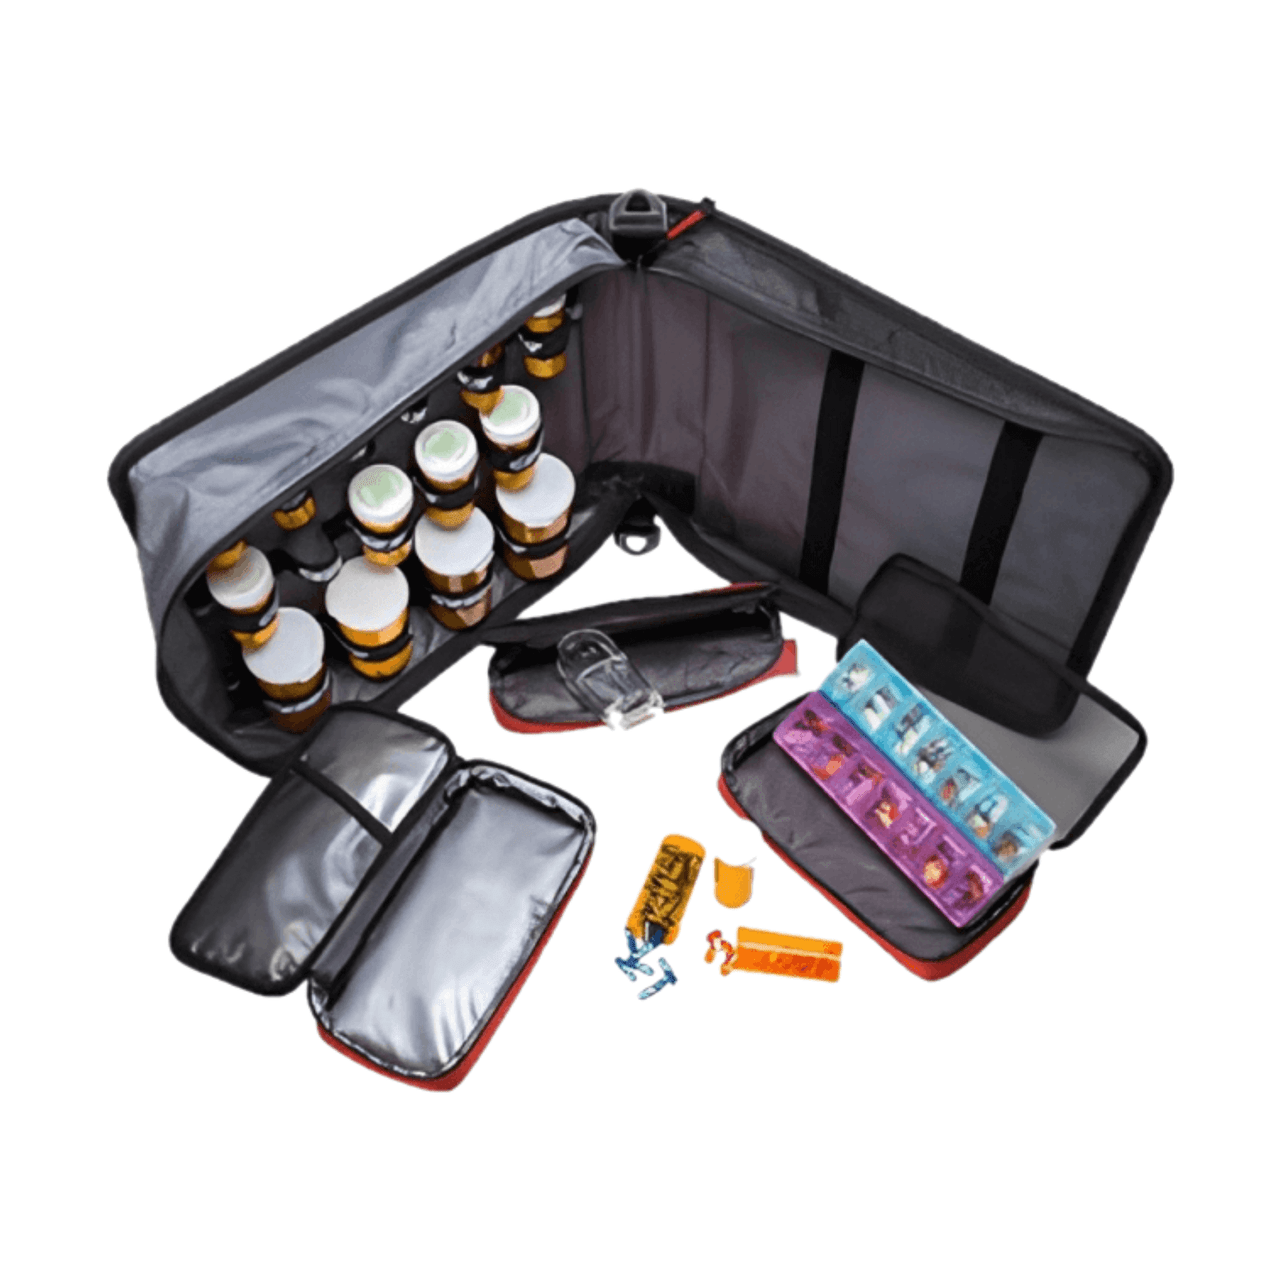 https://cdn11.bigcommerce.com/s-6dpzi5pd3/images/stencil/1280x1280/products/112/447/Medicine_Supply_Organizer_with_Insulin_Cooler_Open_1__77919.1694722513.png?c=1?imbypass=on